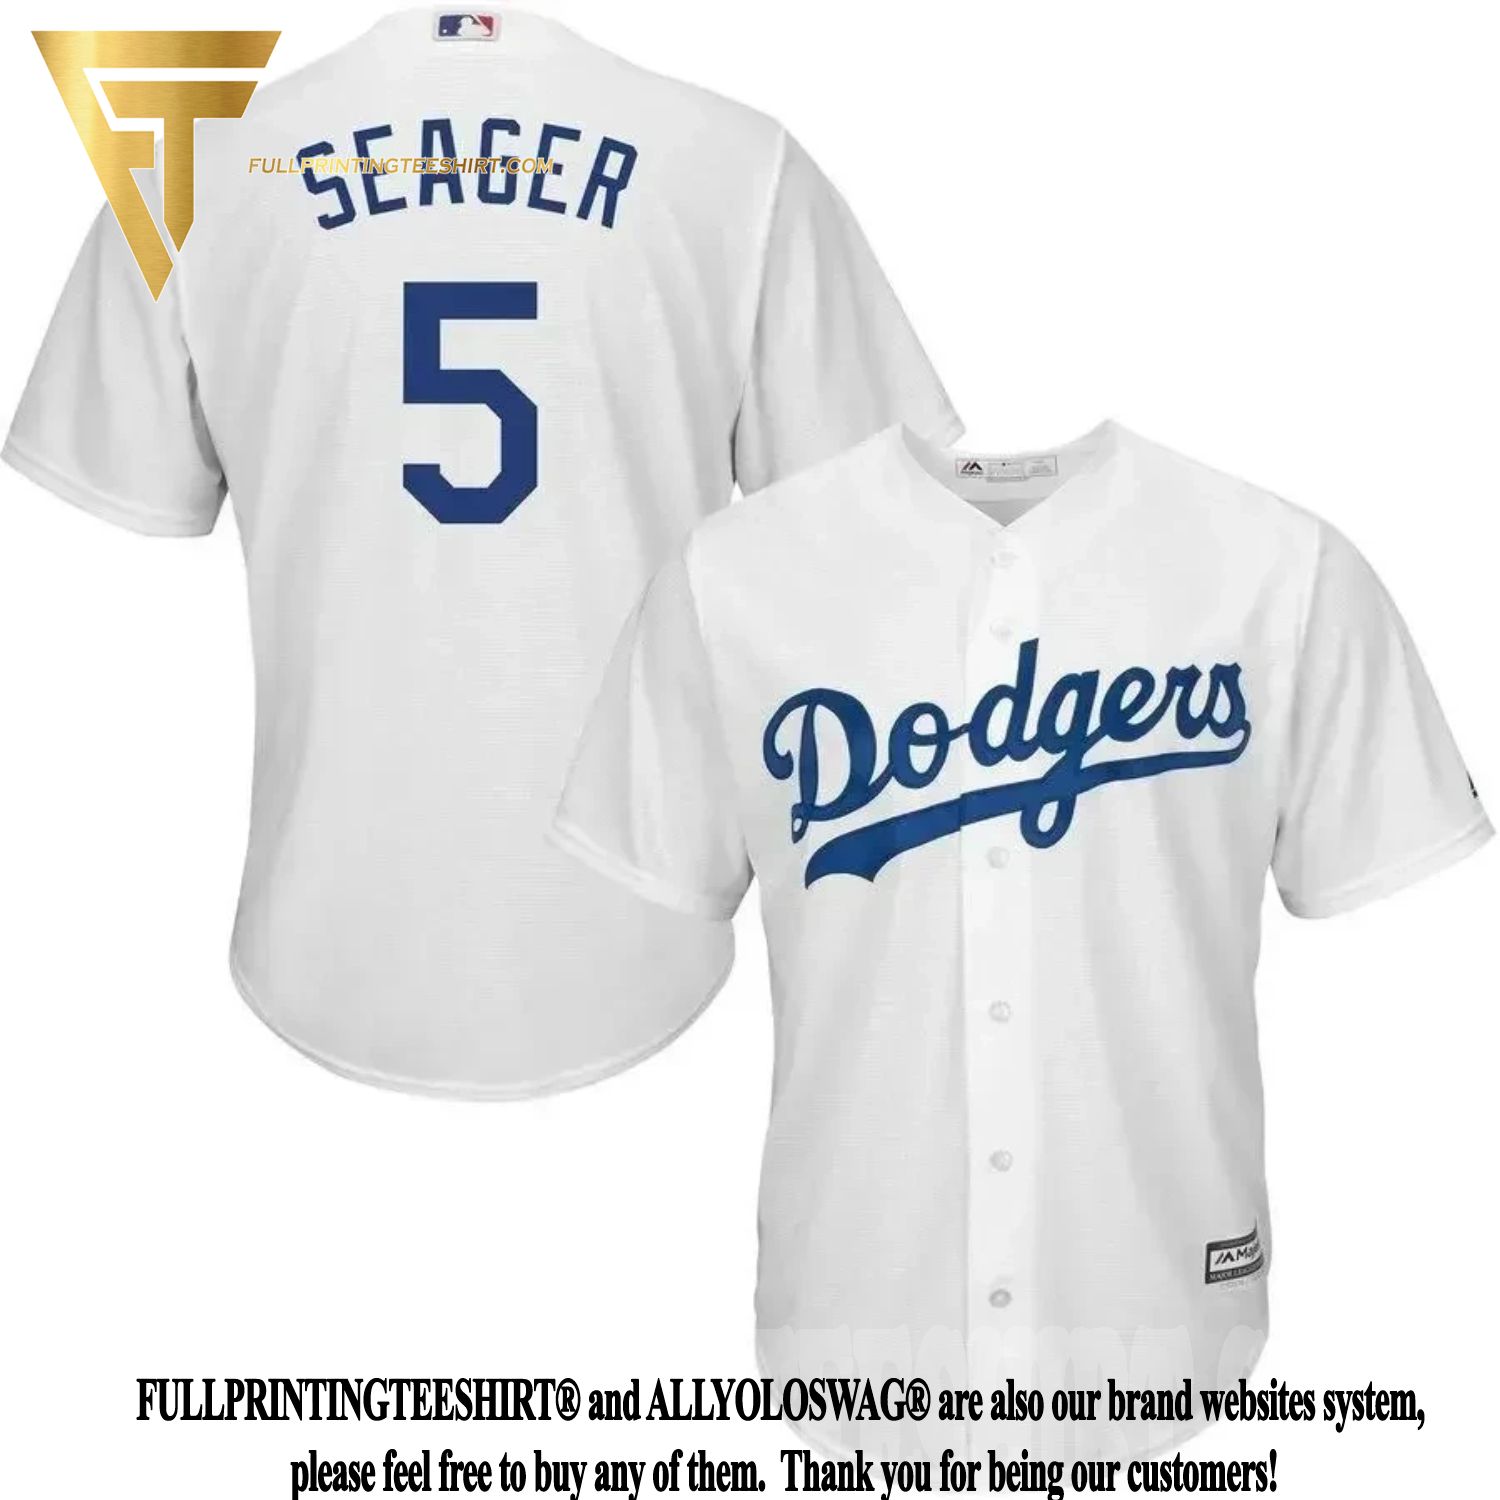 seager youth jersey